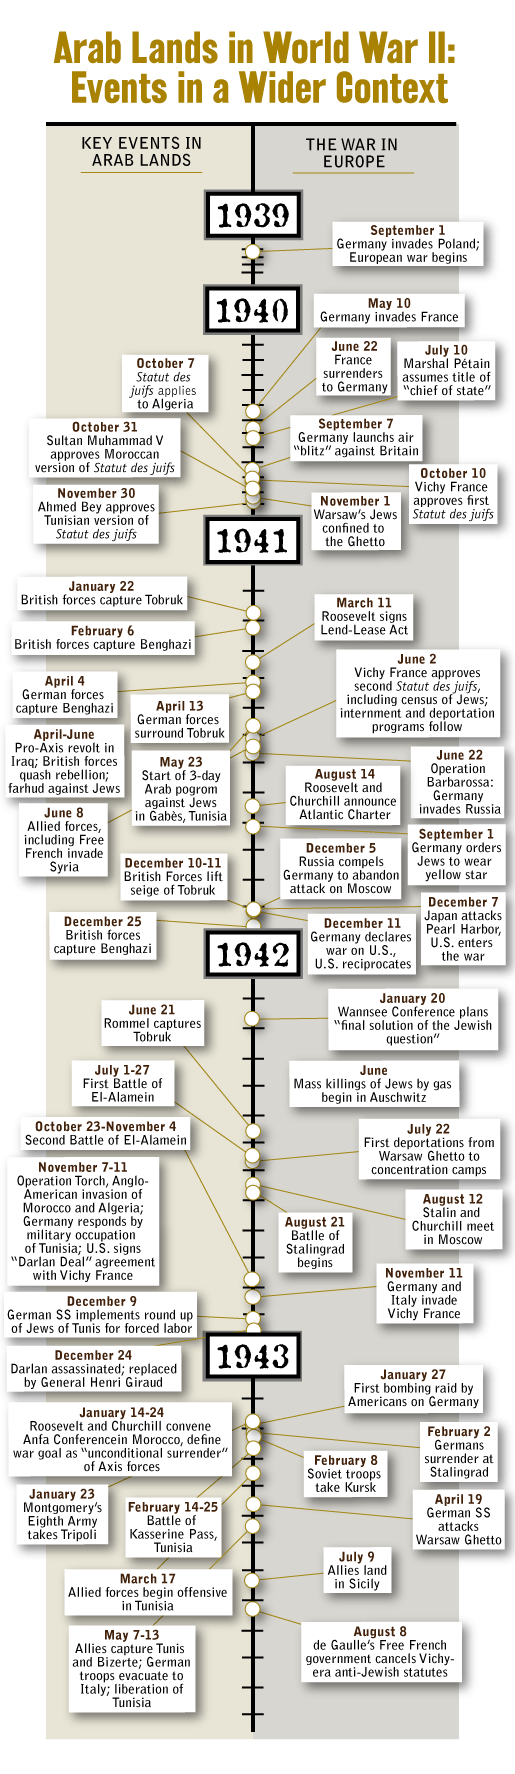 Timeline of the Holocaust in Arab Lands